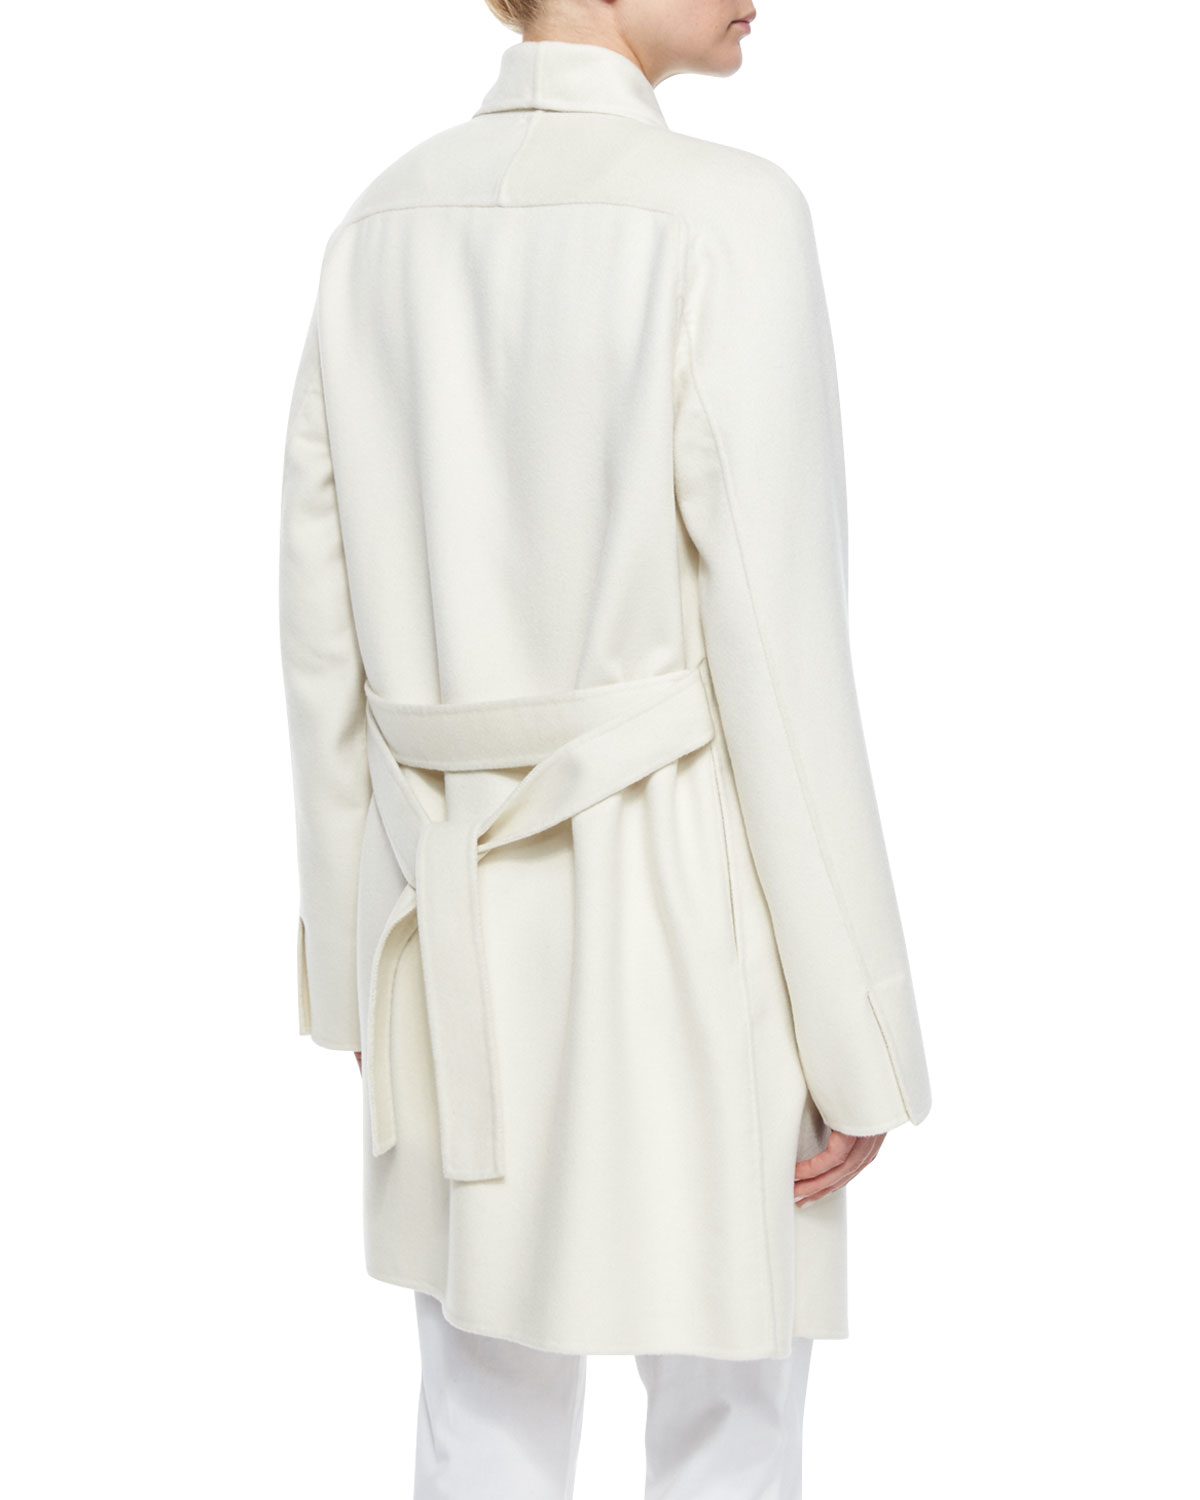 Neiman marcus Cashmere Double-face Wrap Coat in White | Lyst